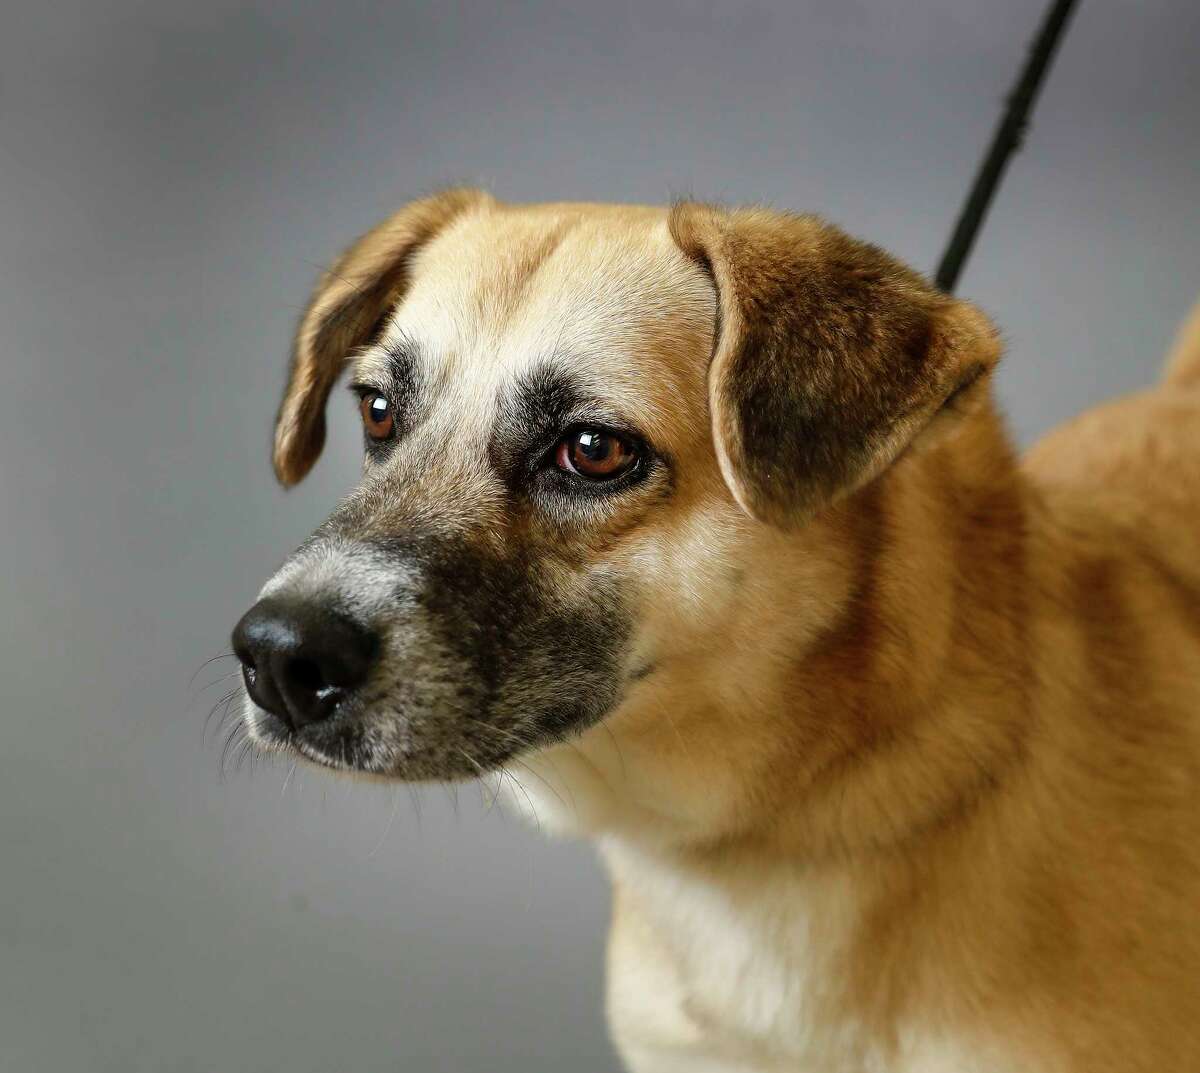 Layla (ID: 41801409) is a 4-year-old, female, Black Mouth Cur mix available for adoption from the Houston Humane Society. Photographed, Monday, Dec. 9, 2019, in Houston. Layla has been in the shelter longer than any other dog, since May 29th-194 days-and as a VIP, her adoption fee is 30% off because she has been in the shelter over 30 days. Layla is a very sweet, outgoing and energetic dog, who knows how to "sit", is great on a leash, and likes other dogs.